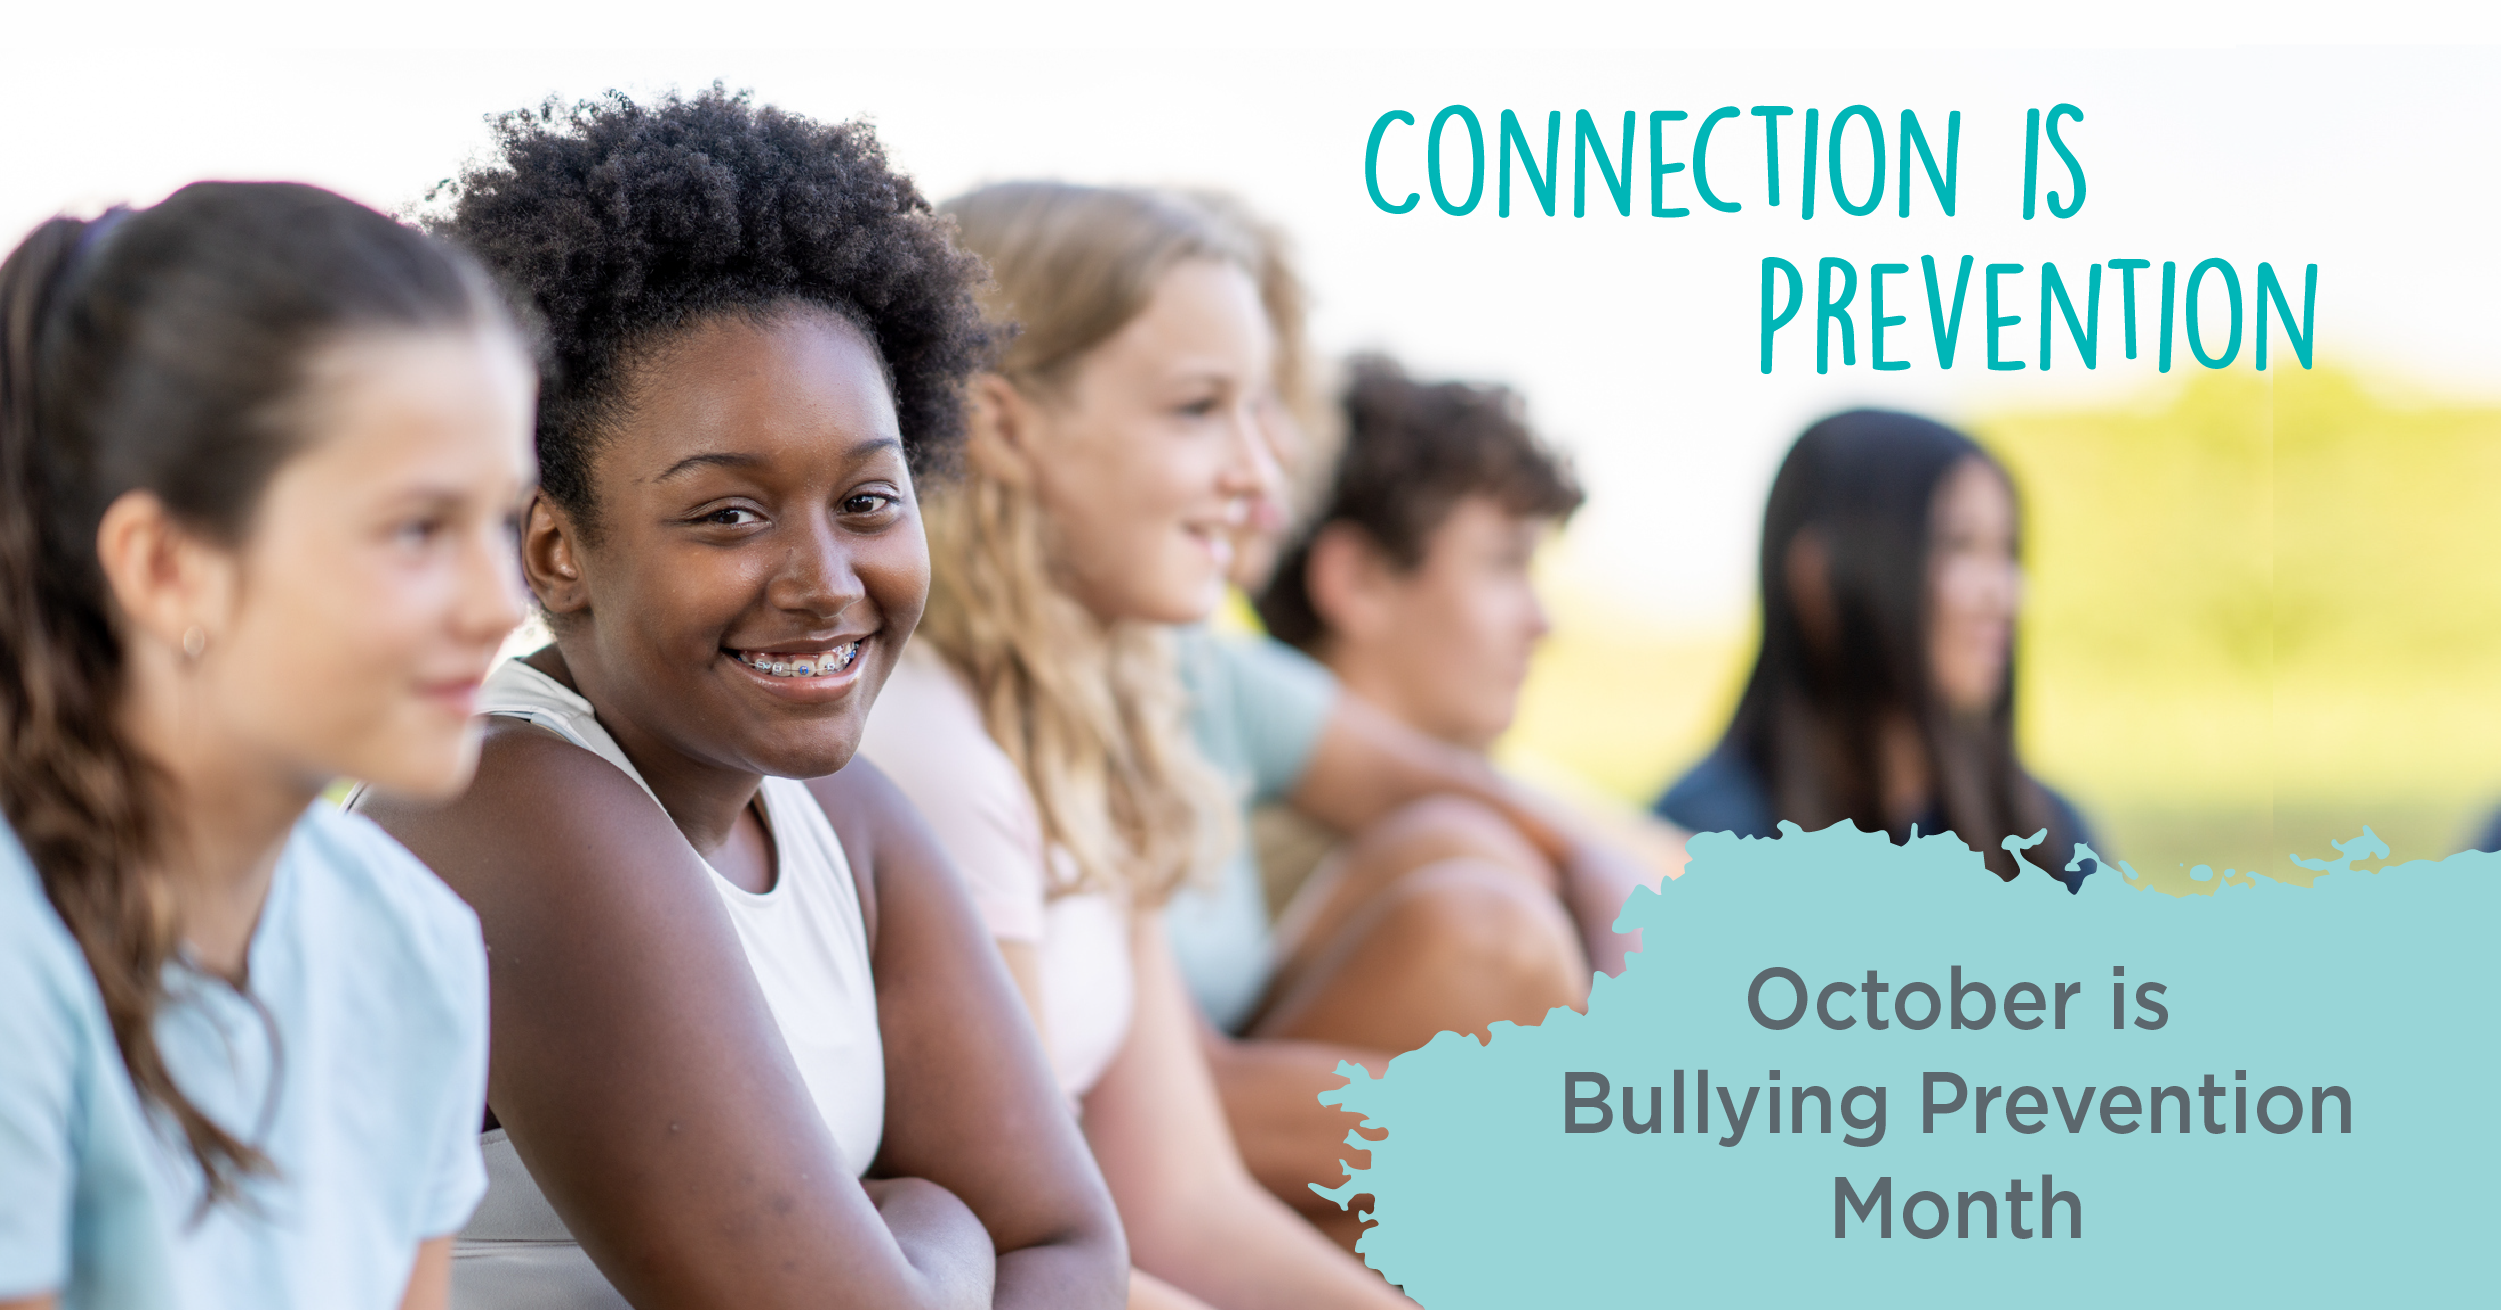 October is Bullying Prevention Month